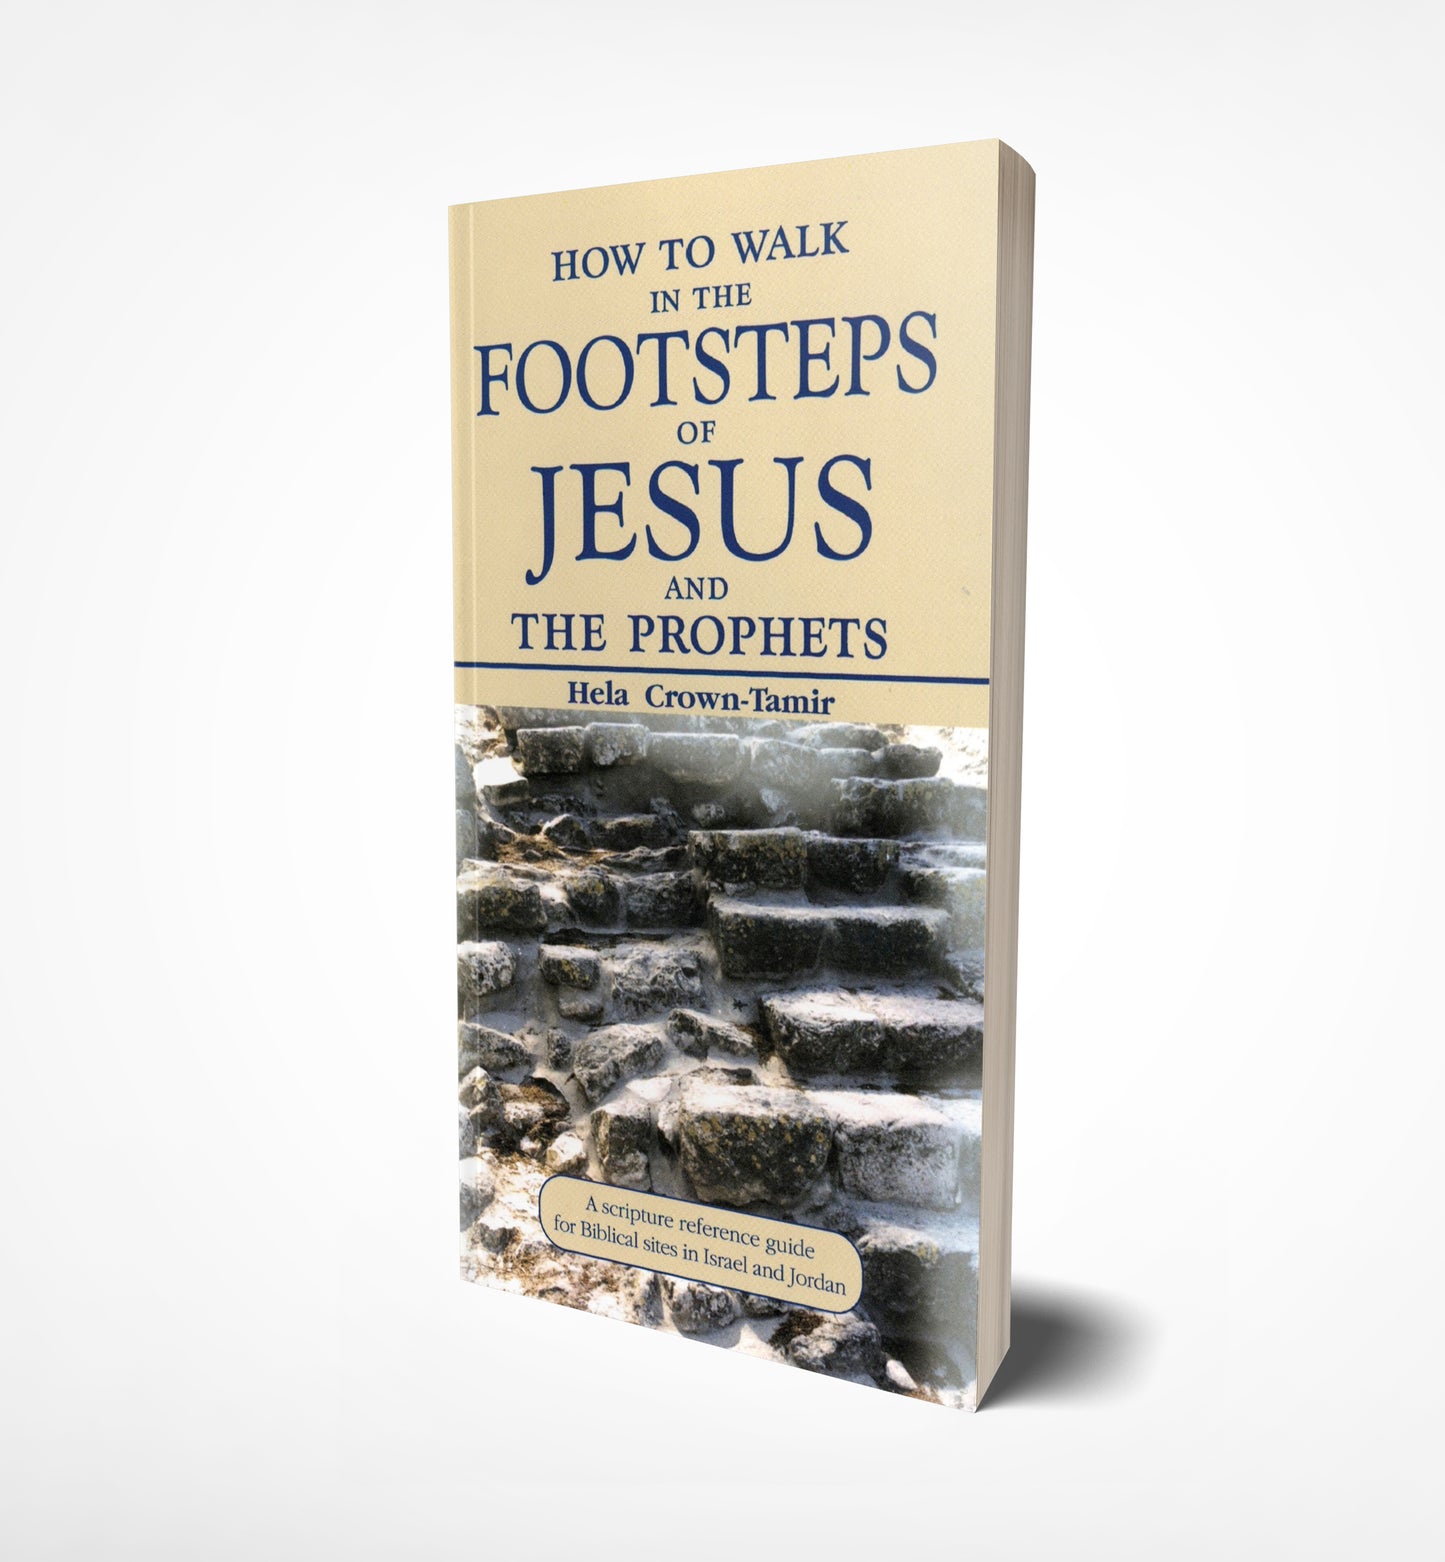 How to walk in the footsteps of Jesus and the prophets by Hela Crown-Tamir-book